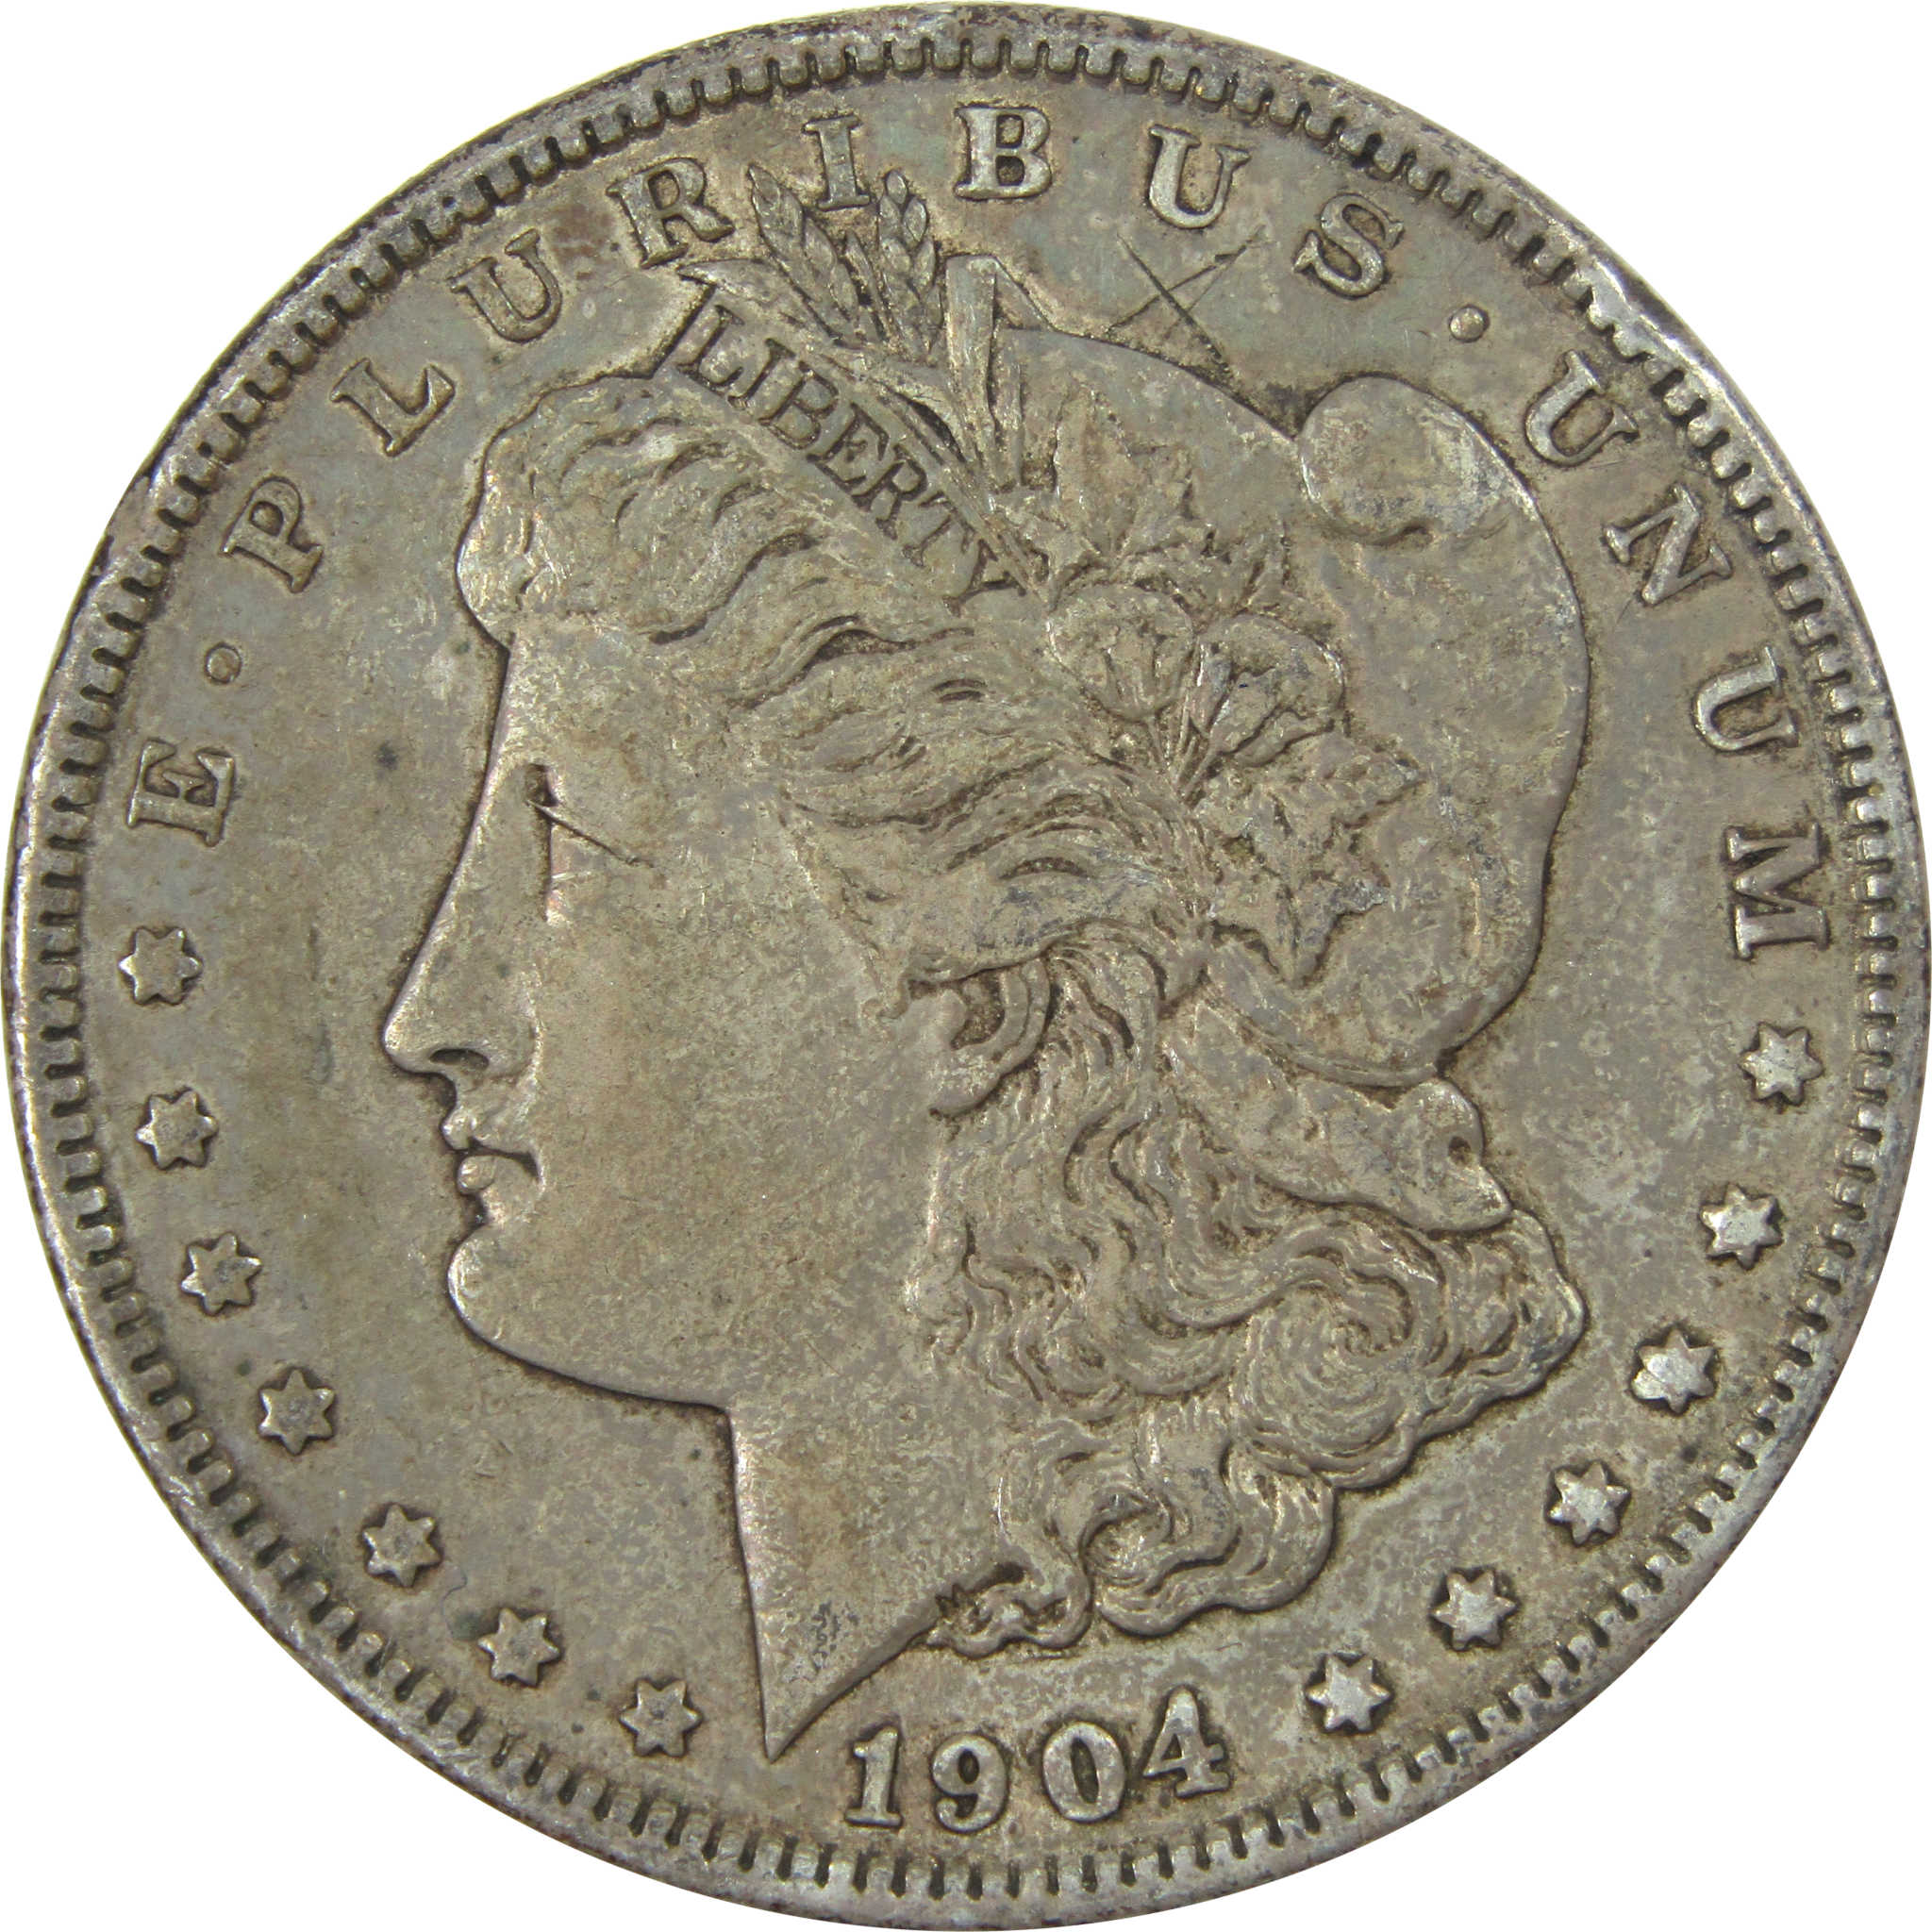 1904 Morgan Dollar XF EF Extremely Fine Silver $1 Coin SKU:I13910 - Morgan coin - Morgan silver dollar - Morgan silver dollar for sale - Profile Coins &amp; Collectibles